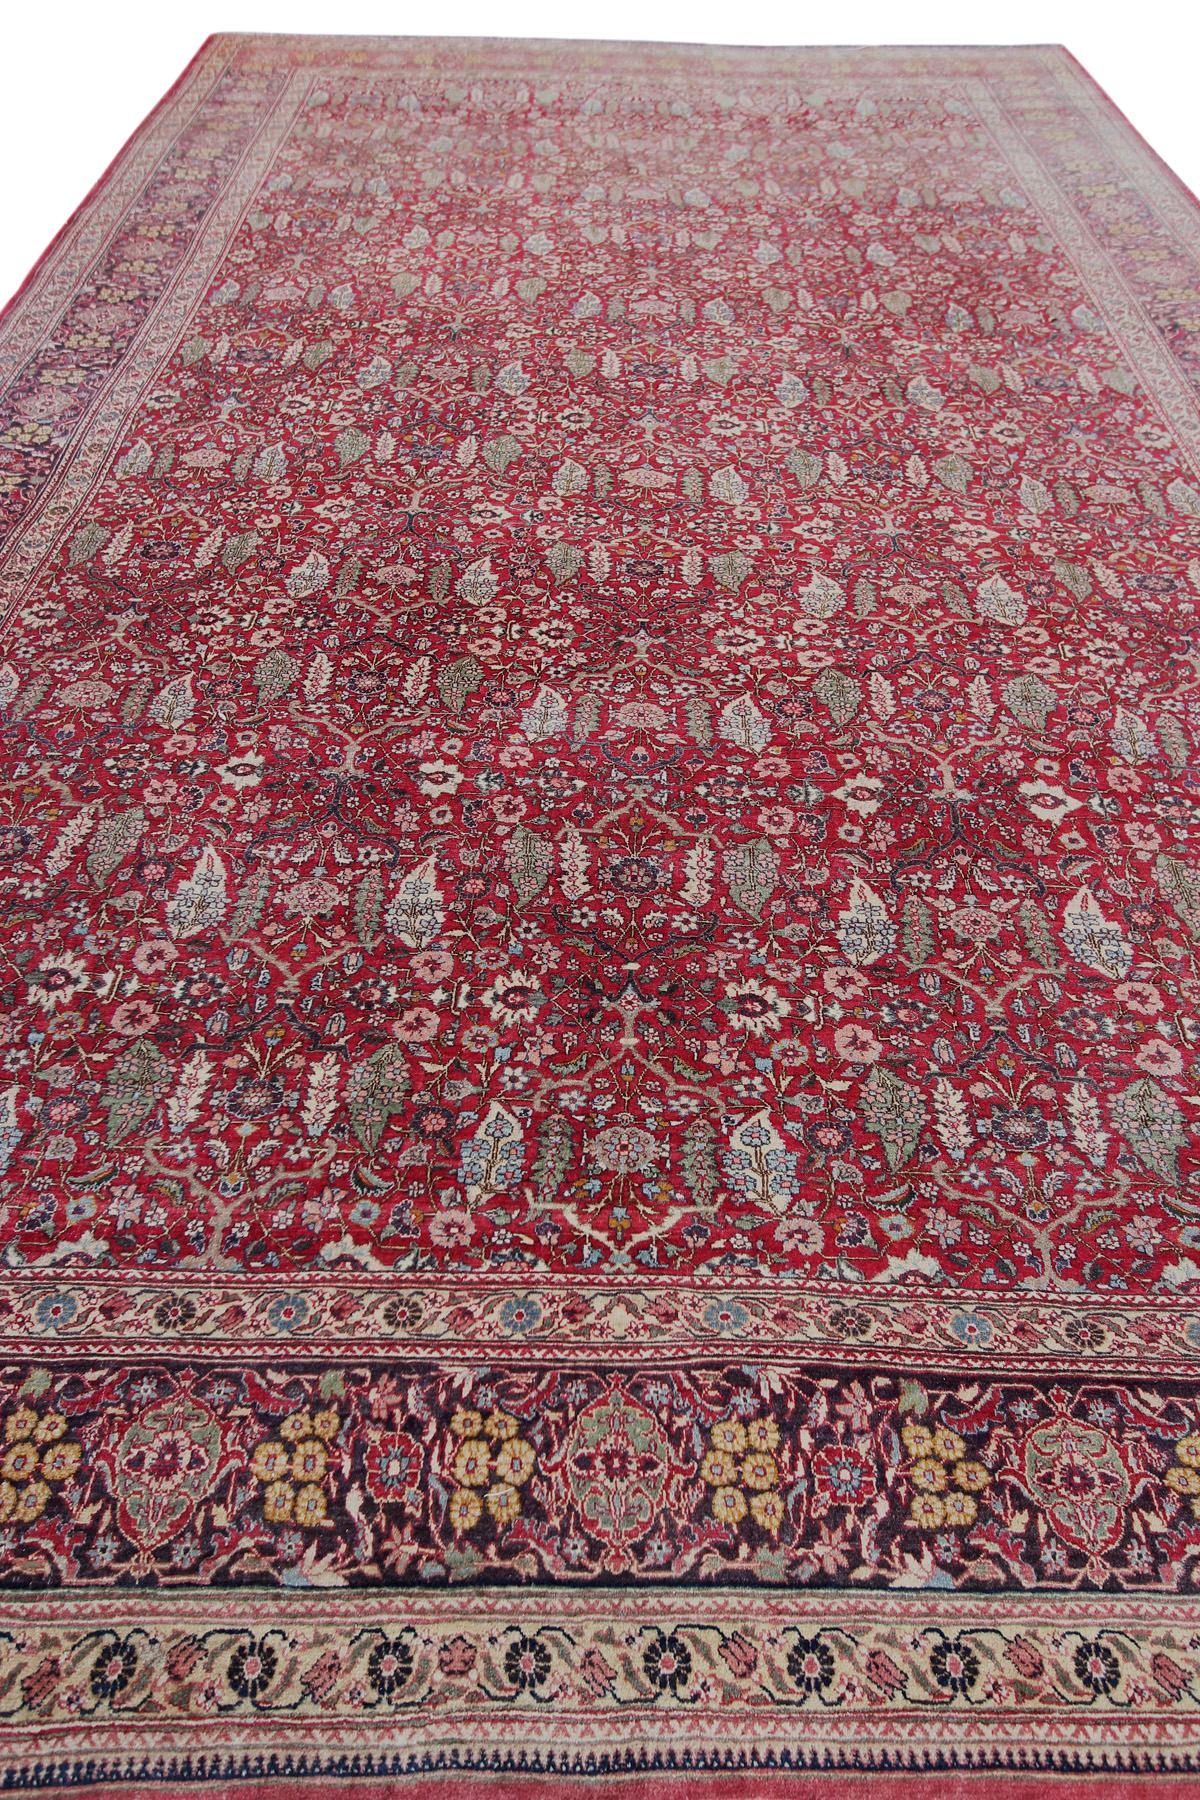 Hand-Knotted 1890 Antique Haji Jalili Rug Antique Persian Rug Geometric Leaf Overall For Sale